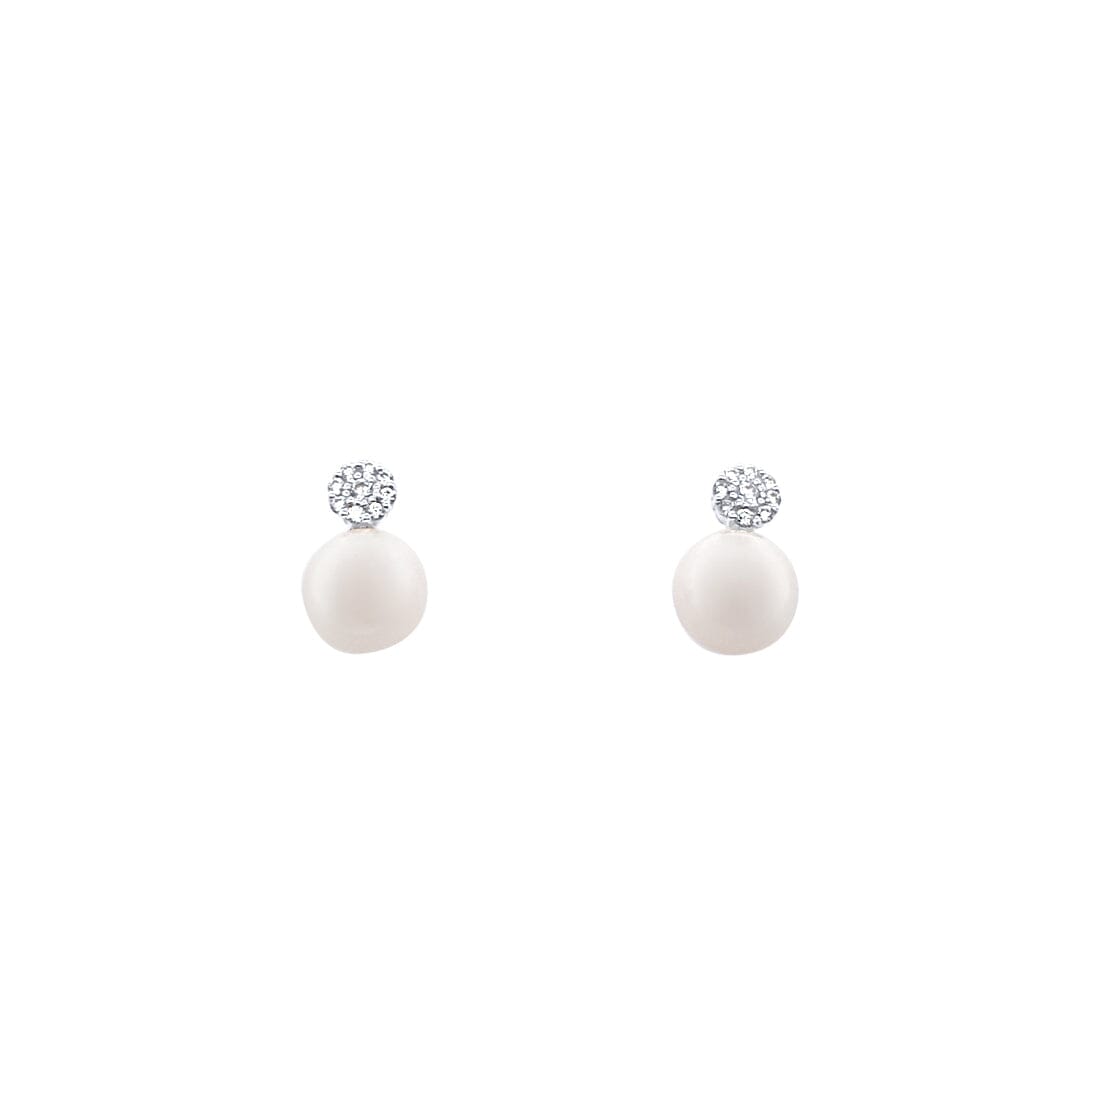 Cluster Stud Earrings with Synthetic Pearls in Sterling Silver Earrings Bevilles 